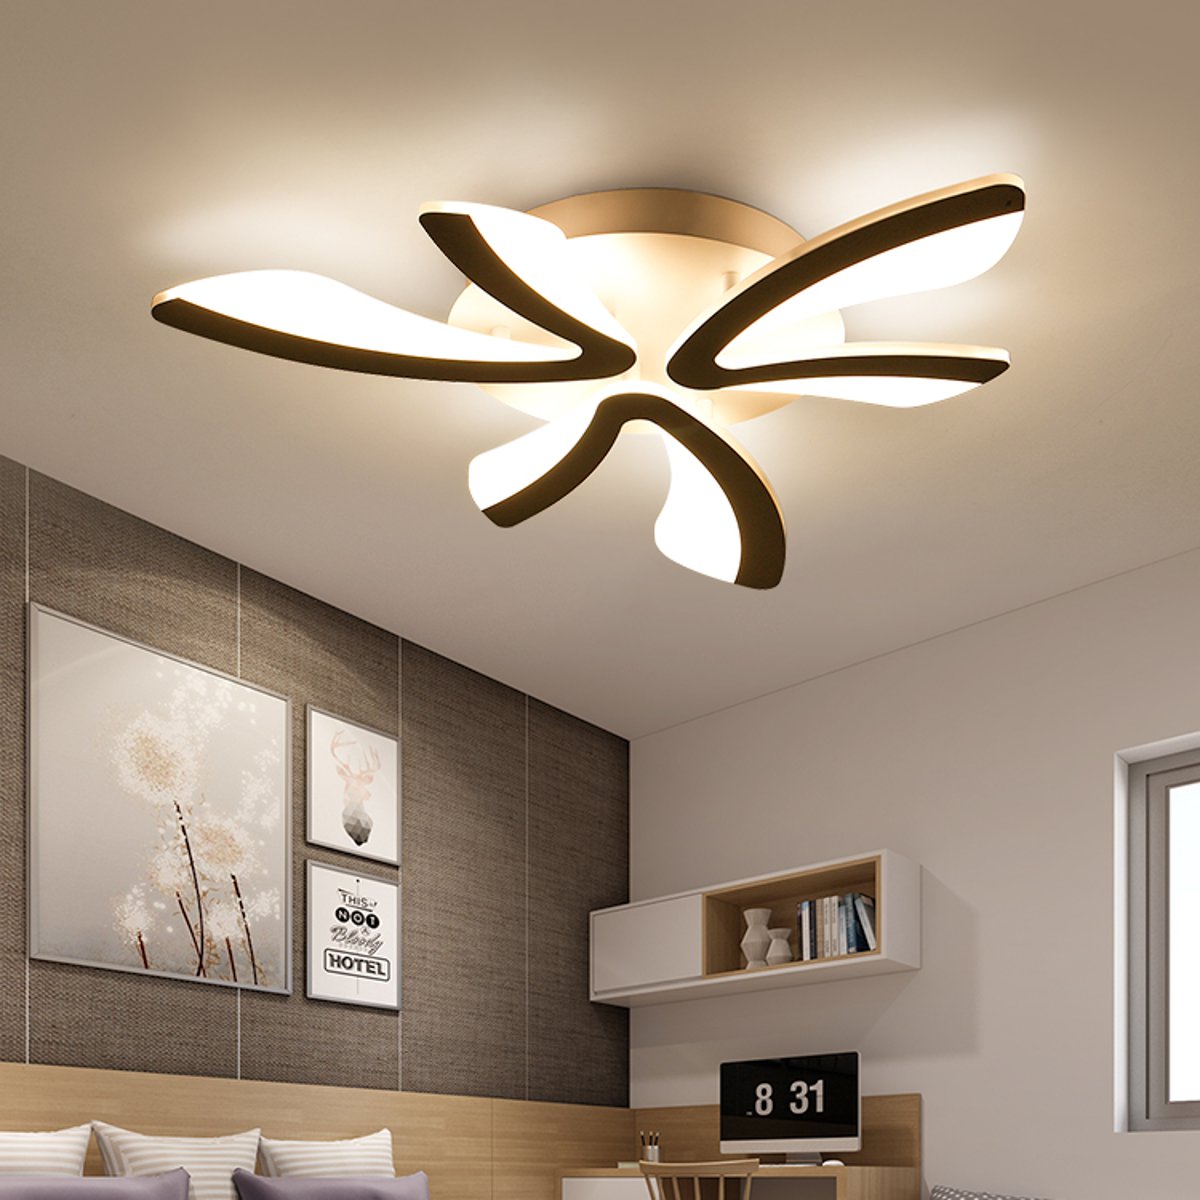 

Acrylic Modern LED Ceiling Light Pendant Lamp Kitchen Bedroom Dimmable Fixture